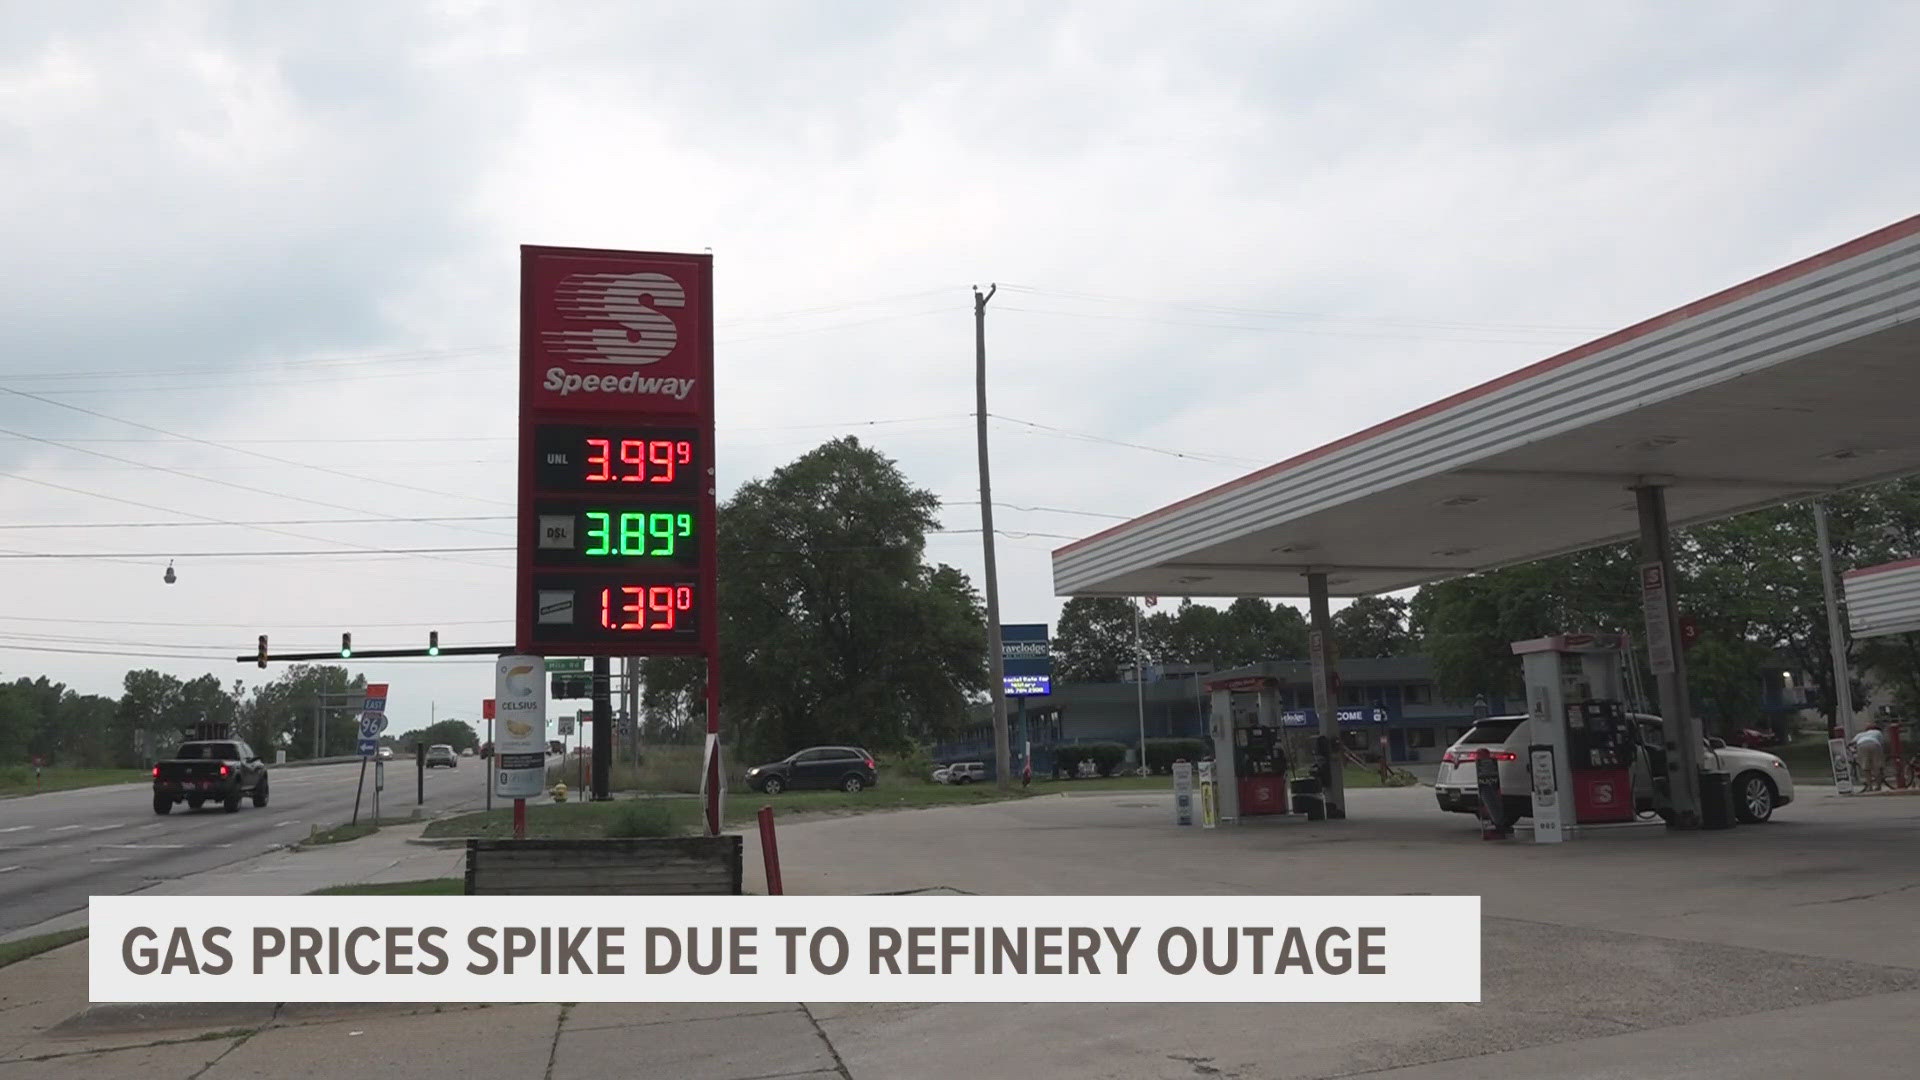 A GasBuddy expert says the spike in prices was due to a refinery outage.